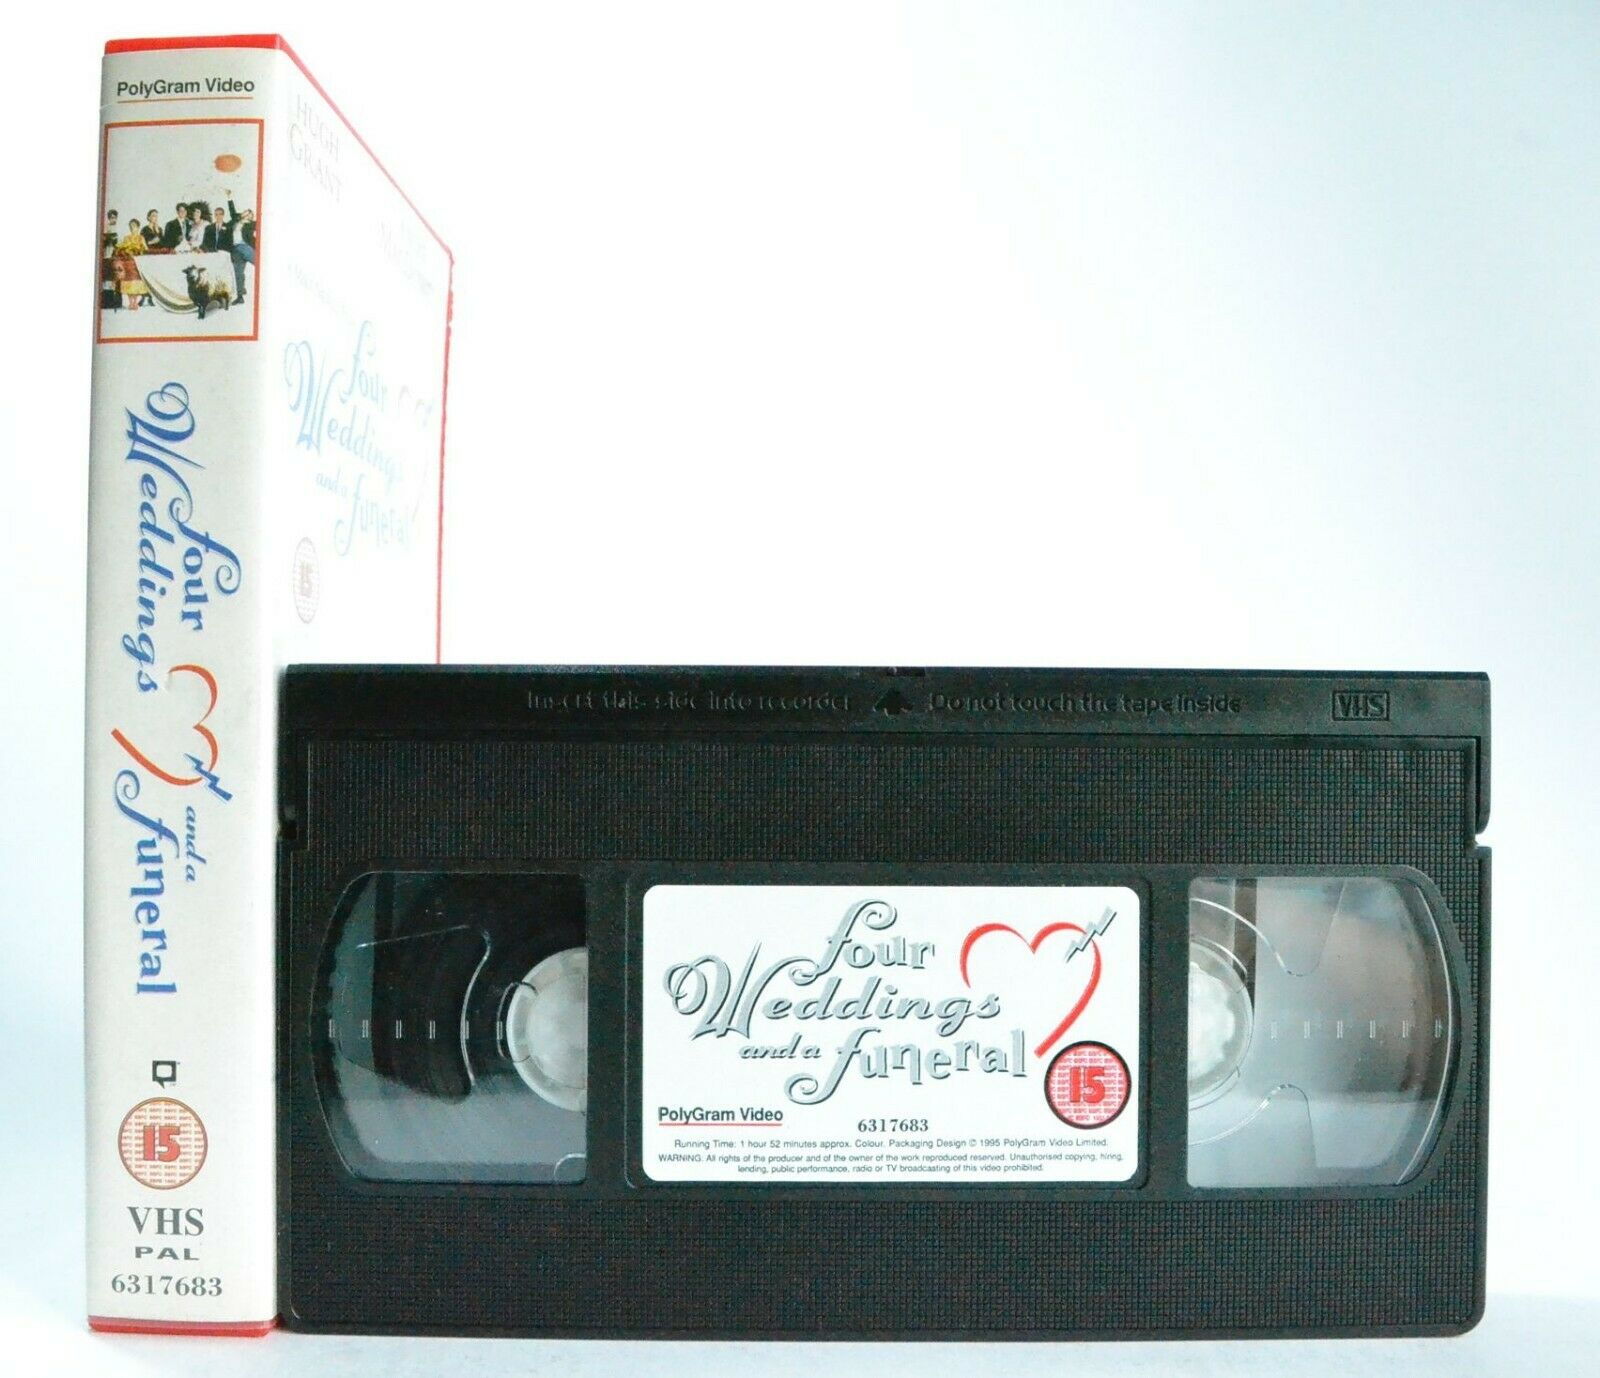 Four Weddings And A Funeral: (1994) British Comedy - H.Grant/A.McDowell - VHS-